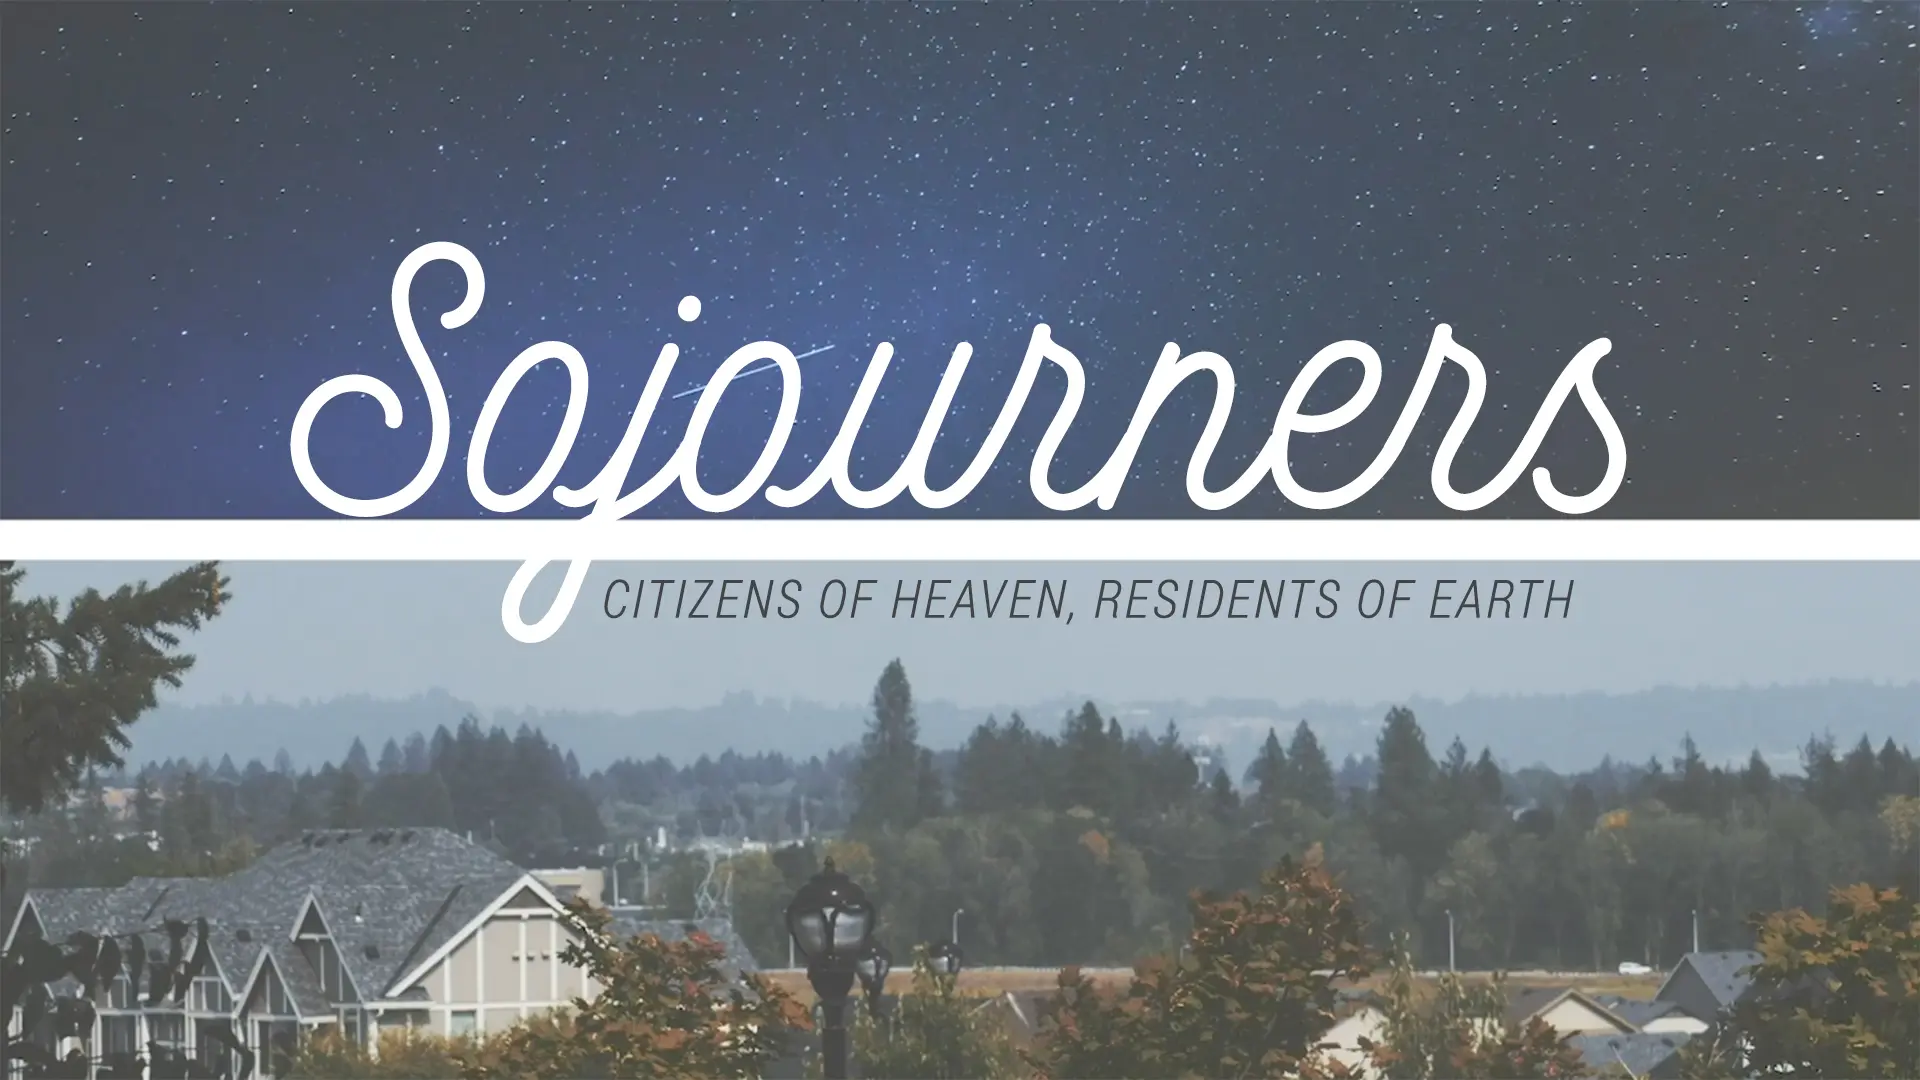 Featured image for “Sojourners”